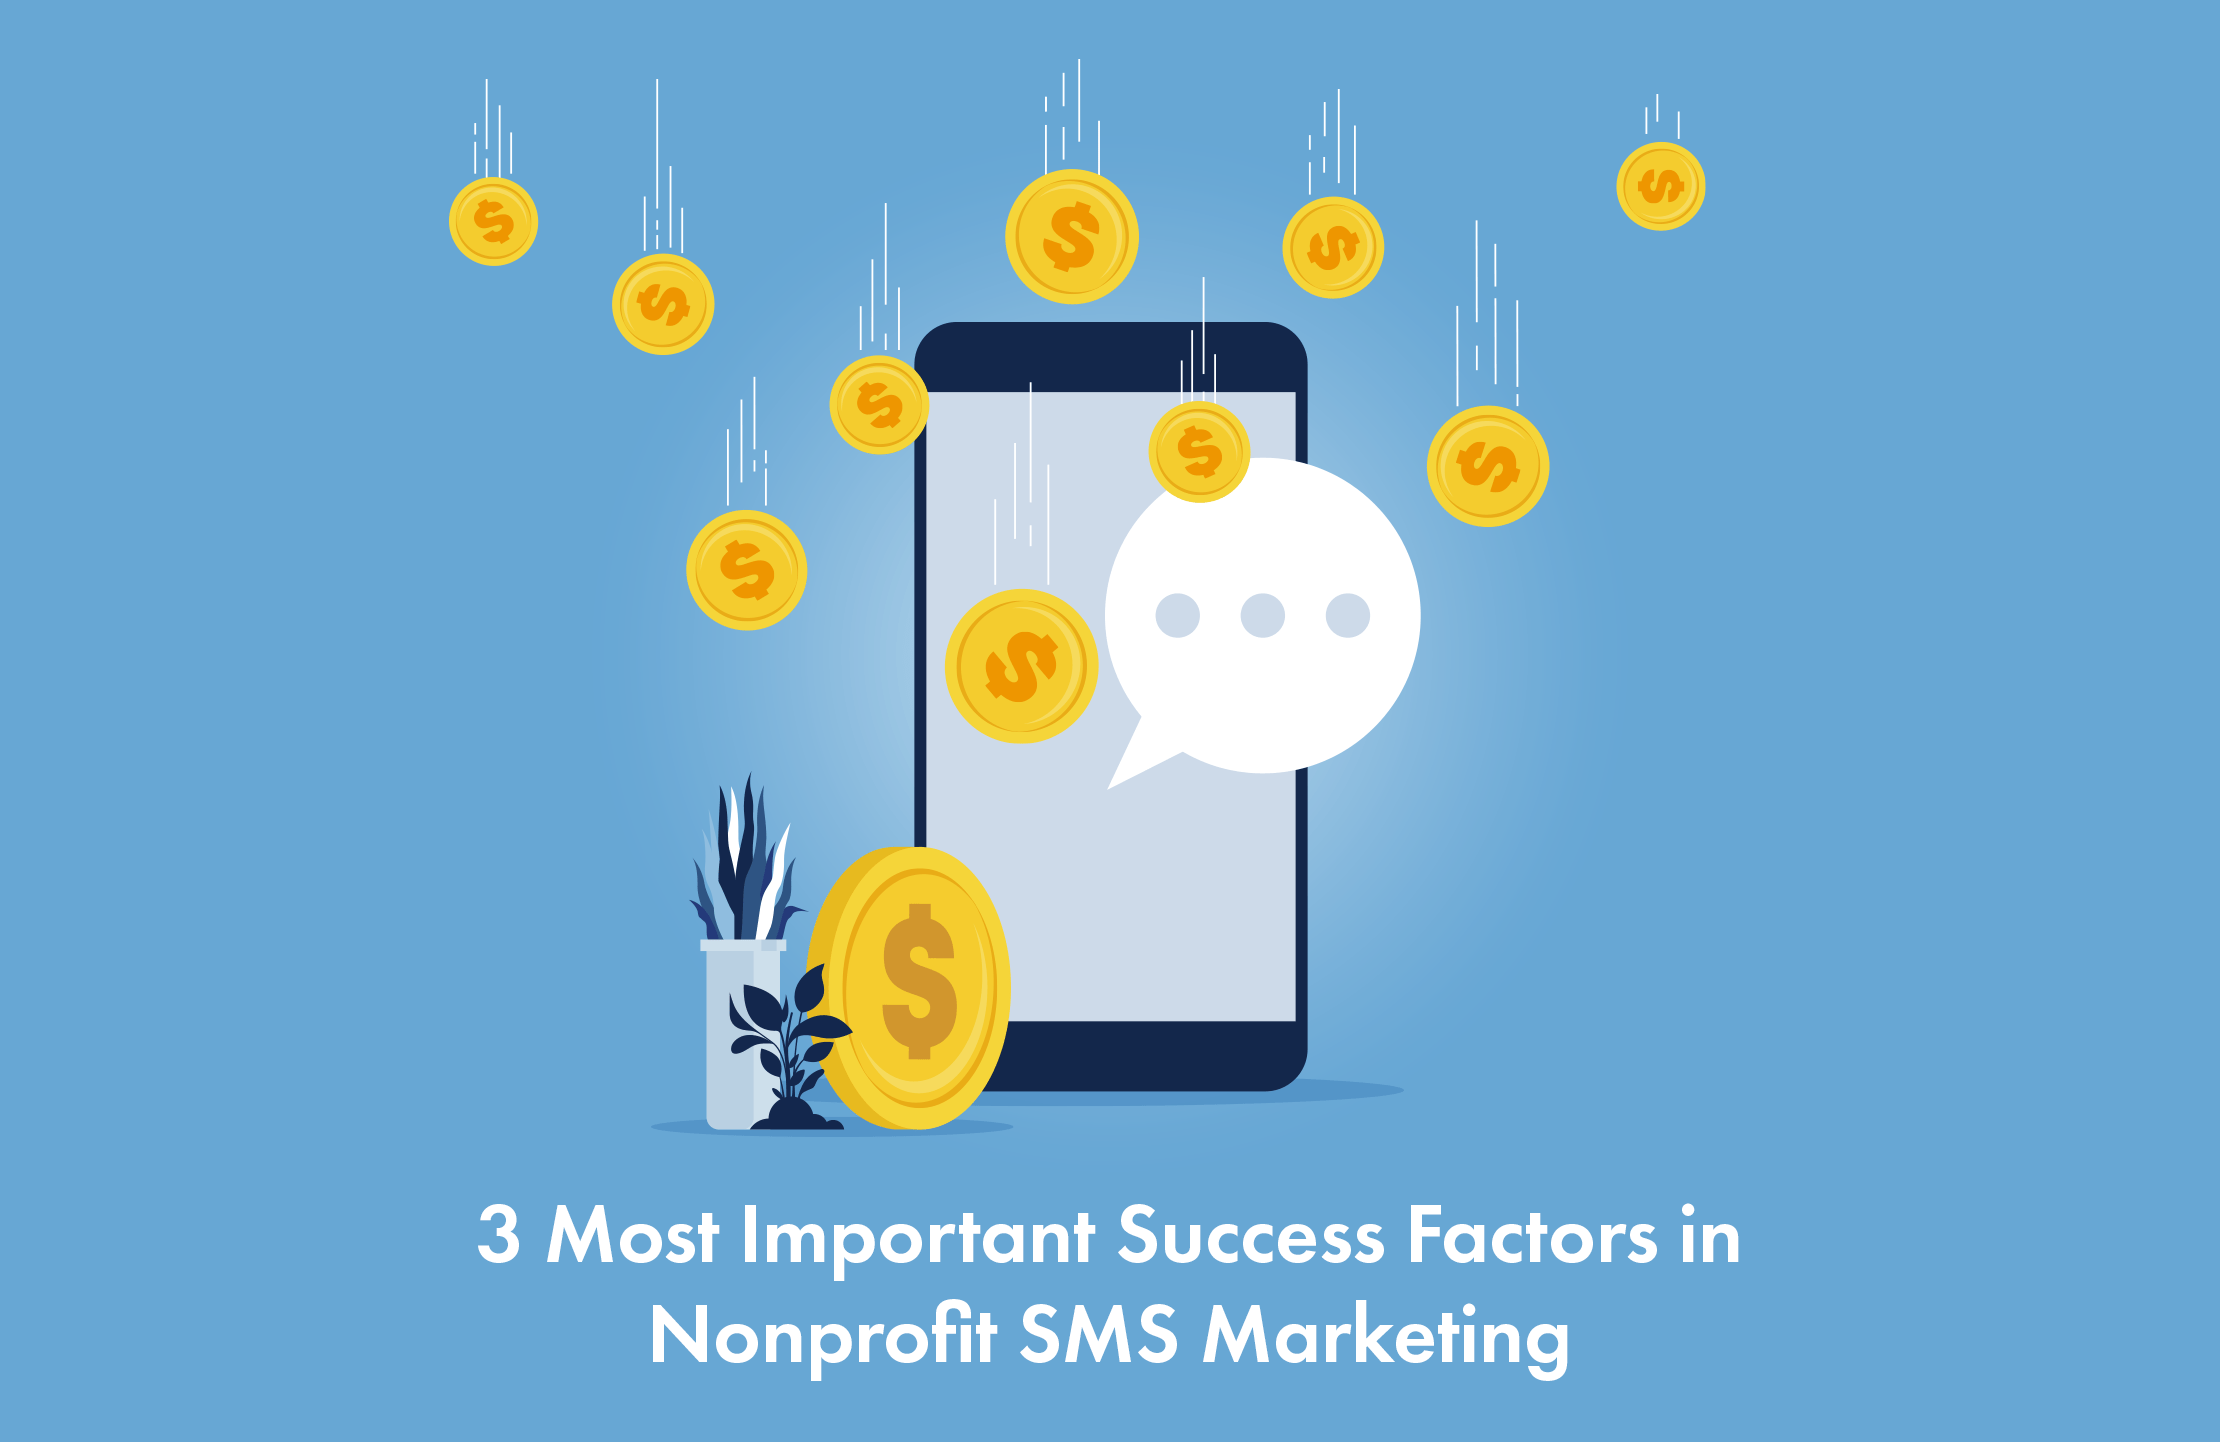 3 Most Important Success Factors in Nonprofit SMS Marketing